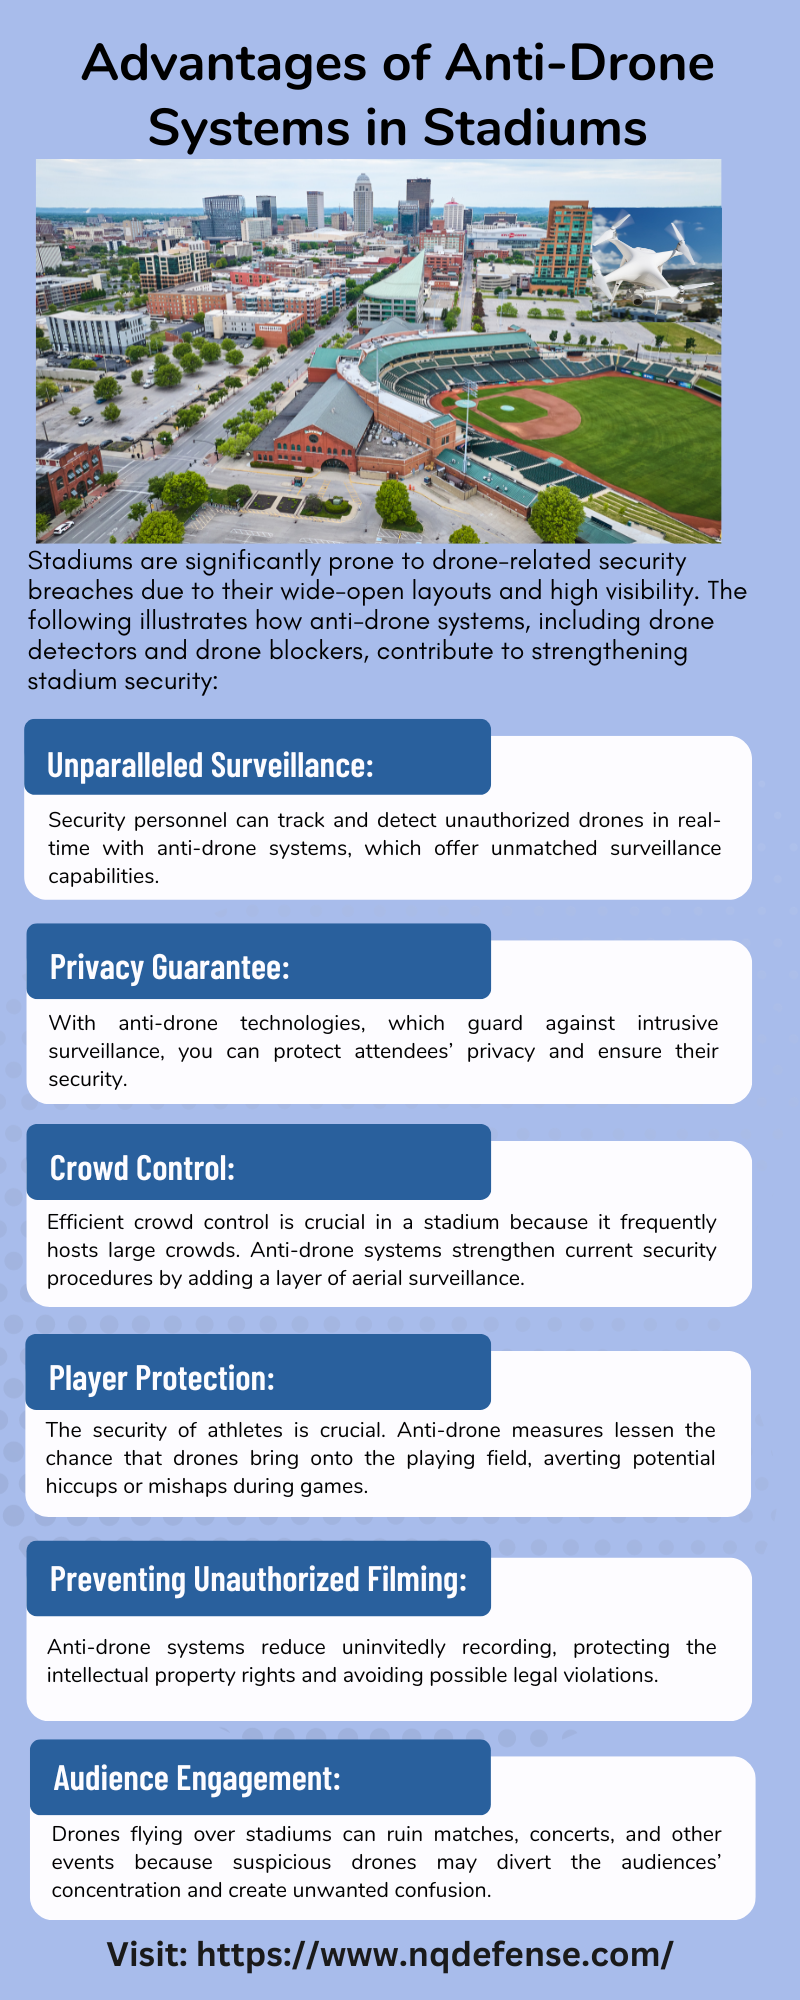 Advantages of Anti-Drone Systems in Stadiums